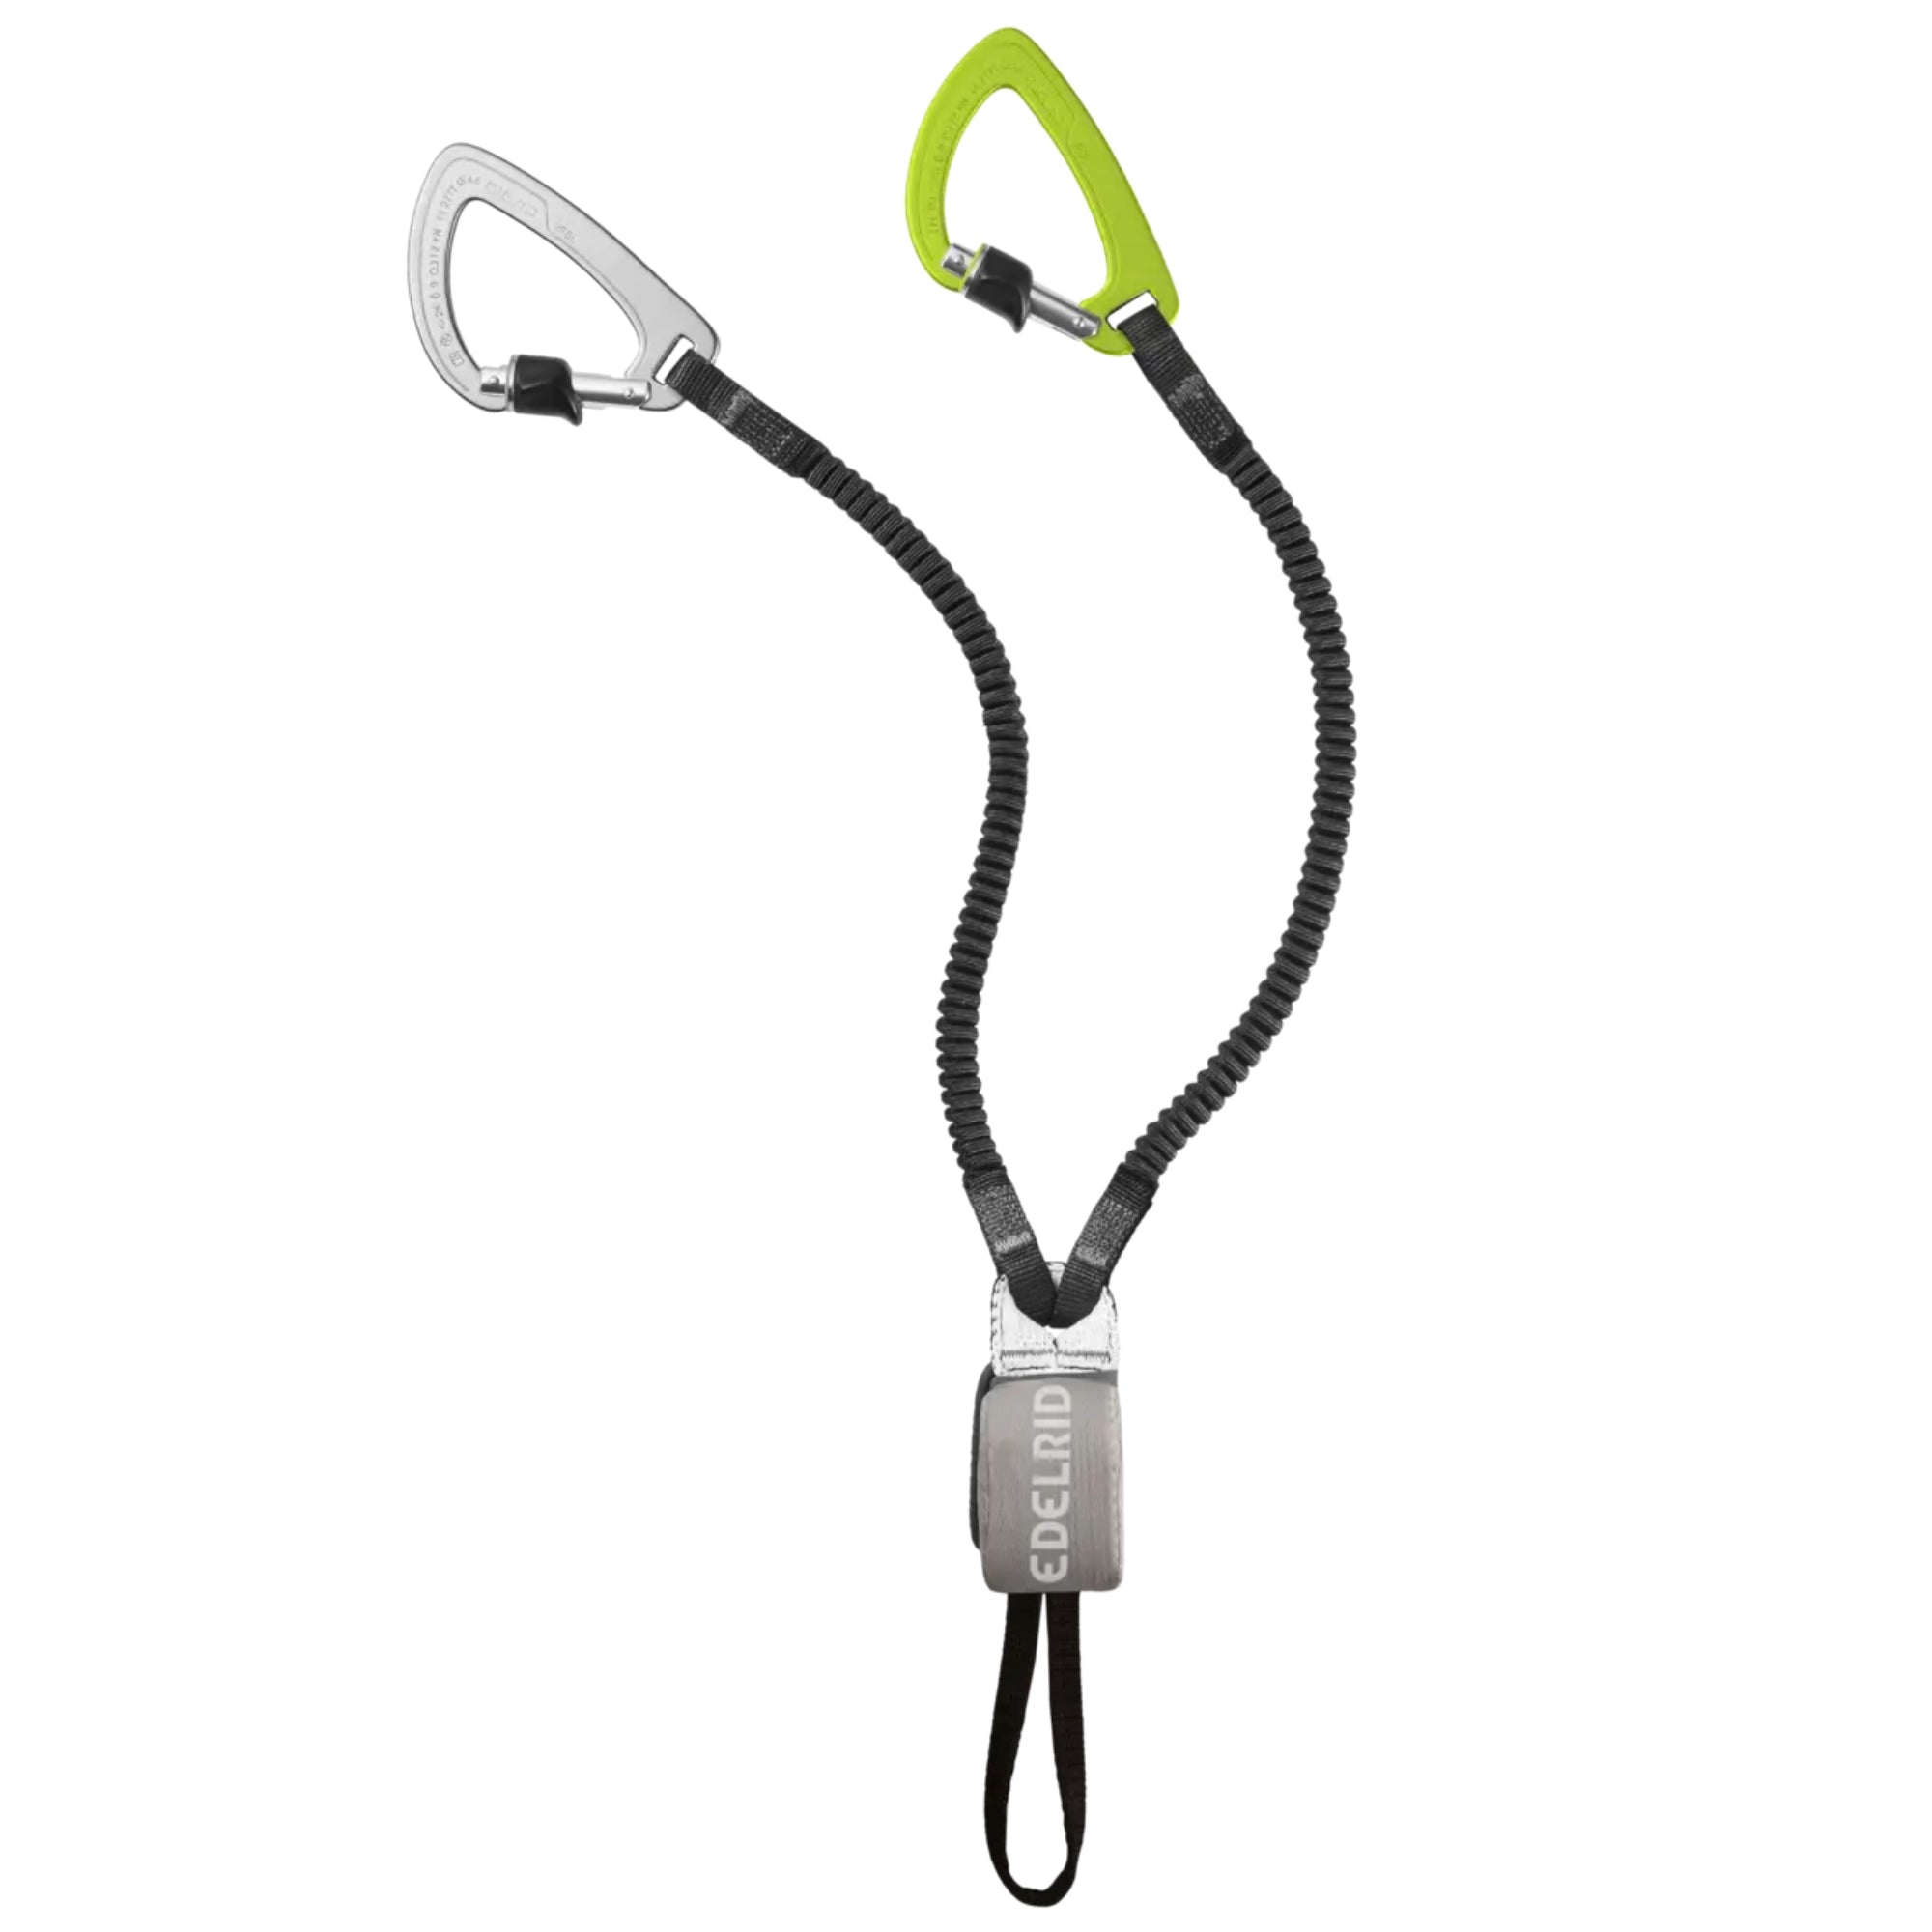 Edelrid Cable Kit Ultralite VII